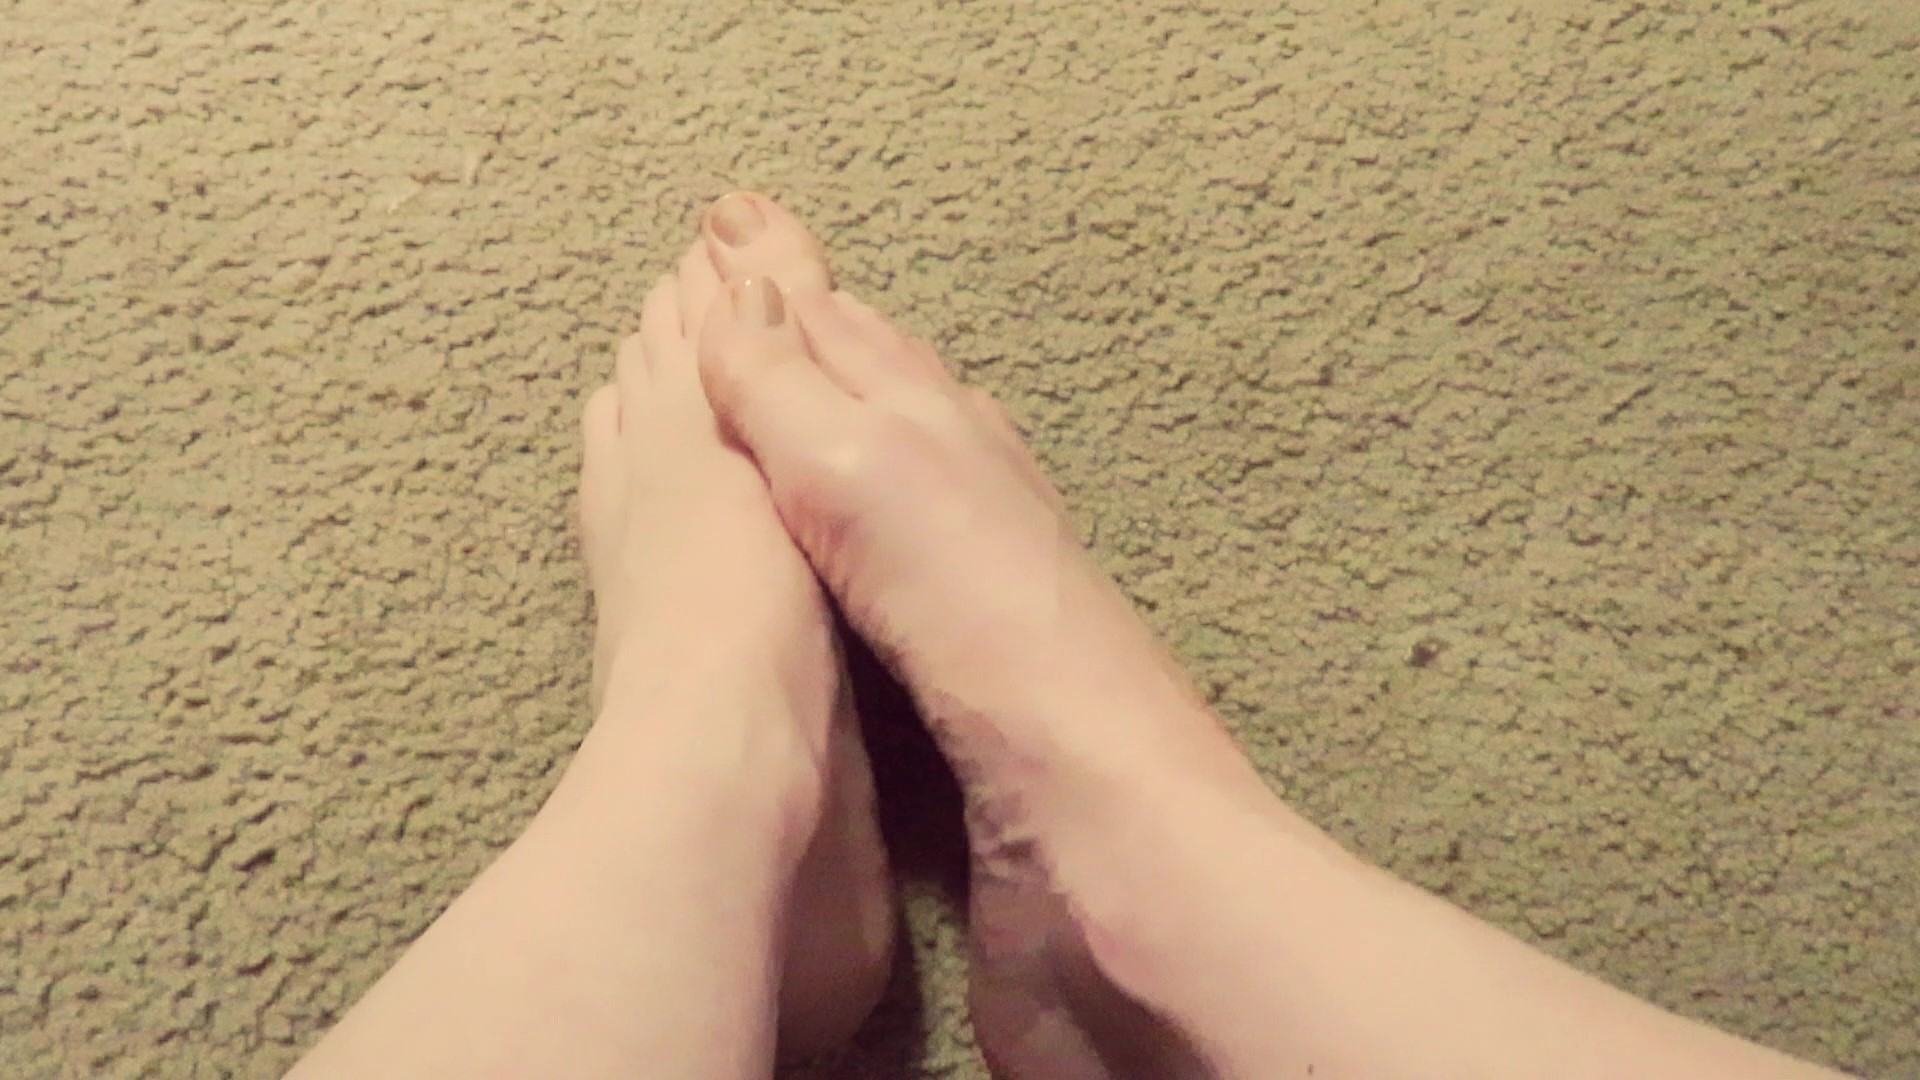 Footsie Videos Photos And Other Content And Other Amateur Porn Content On Elm